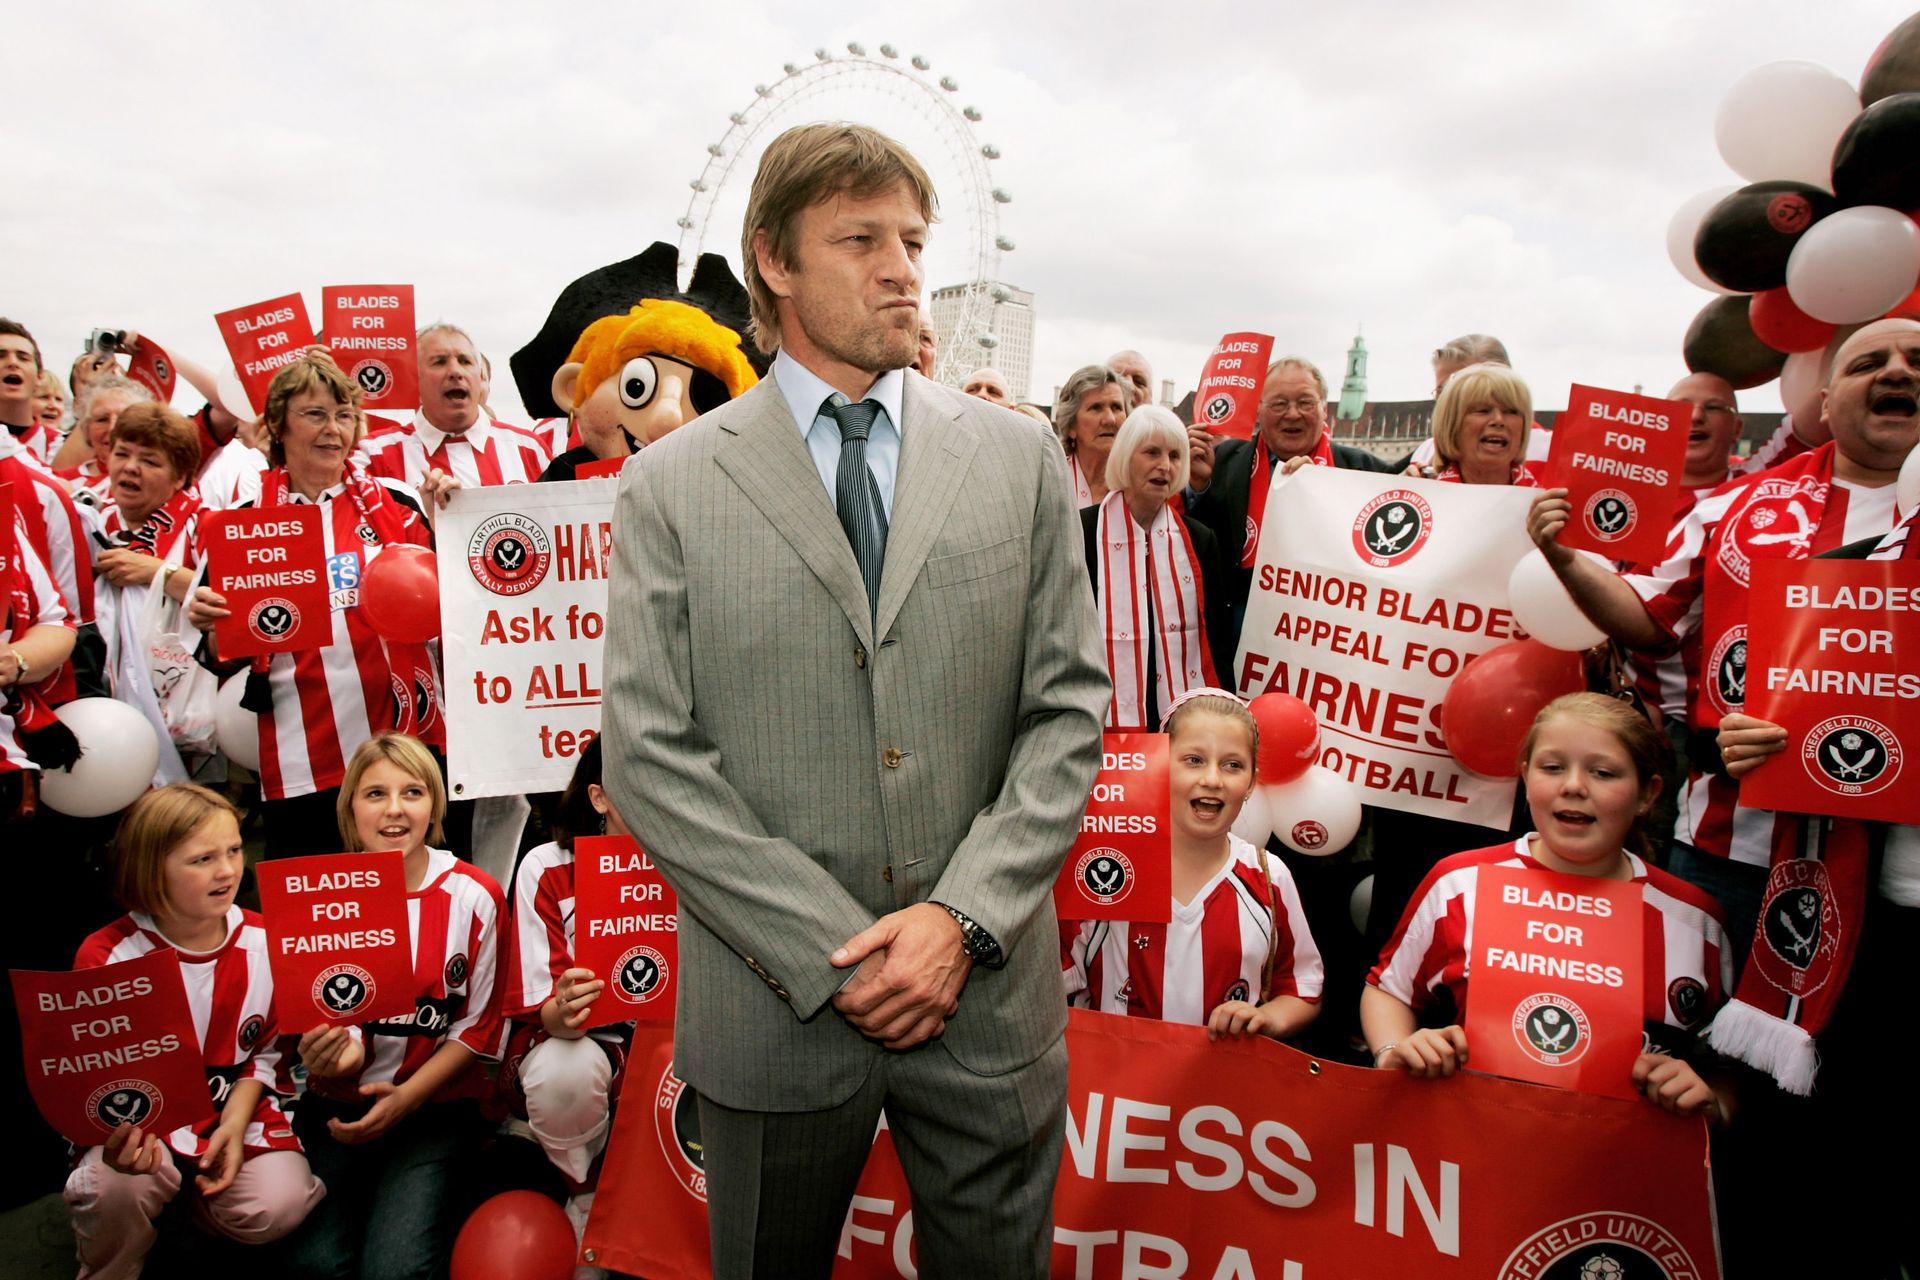 <p>                     Sean Bean played the role of a Sheffield United footballer in the 1996 film <em>When Saturday Comes </em>and the Hollywood actor is a big Blades fan in real life.                   </p>                                      <p>                     A regular at Bramall Lane over the years, the Lord of the Rings and Game of Thrones star managed a Sheffield United Legends' side versus Fulham All Stars in 2016 and also took part in a protest against the Blades' relegation in 2007, amid their dispute with West Ham over the legality of fielding Carlos Tevez.                   </p>